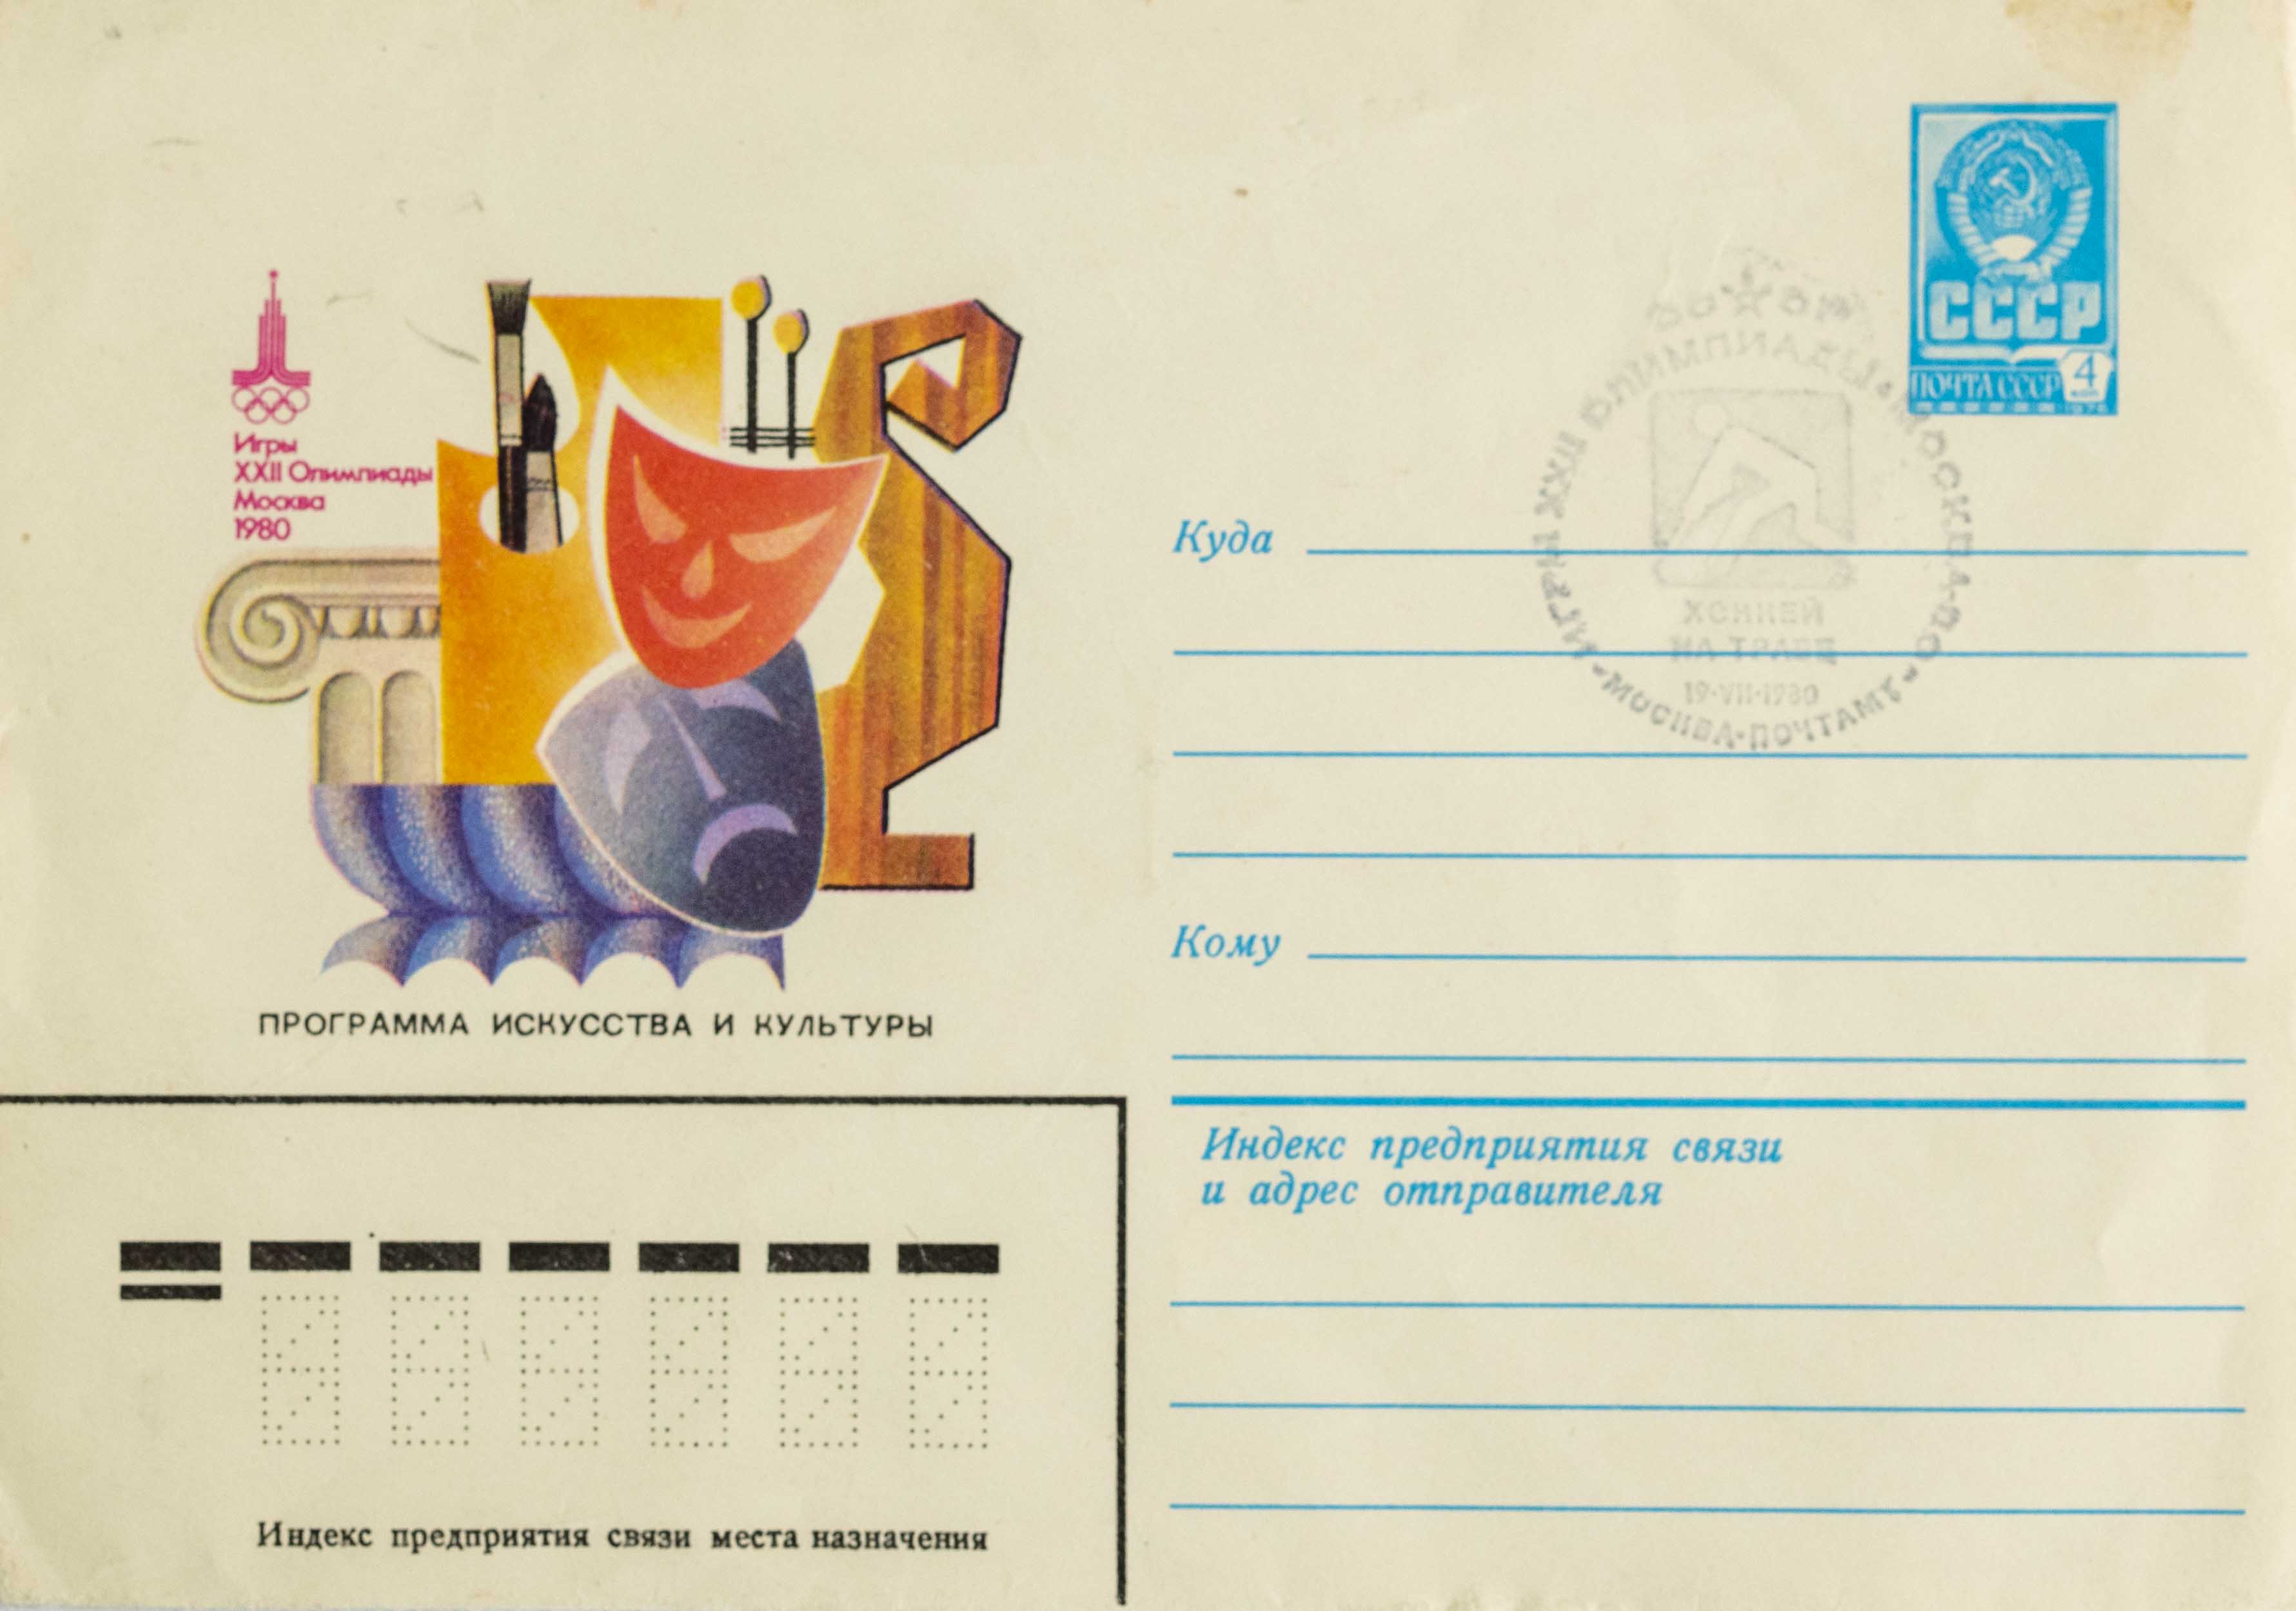 FDC, Olympic games Moscow, Program umění a kultury, Moscow, 1980